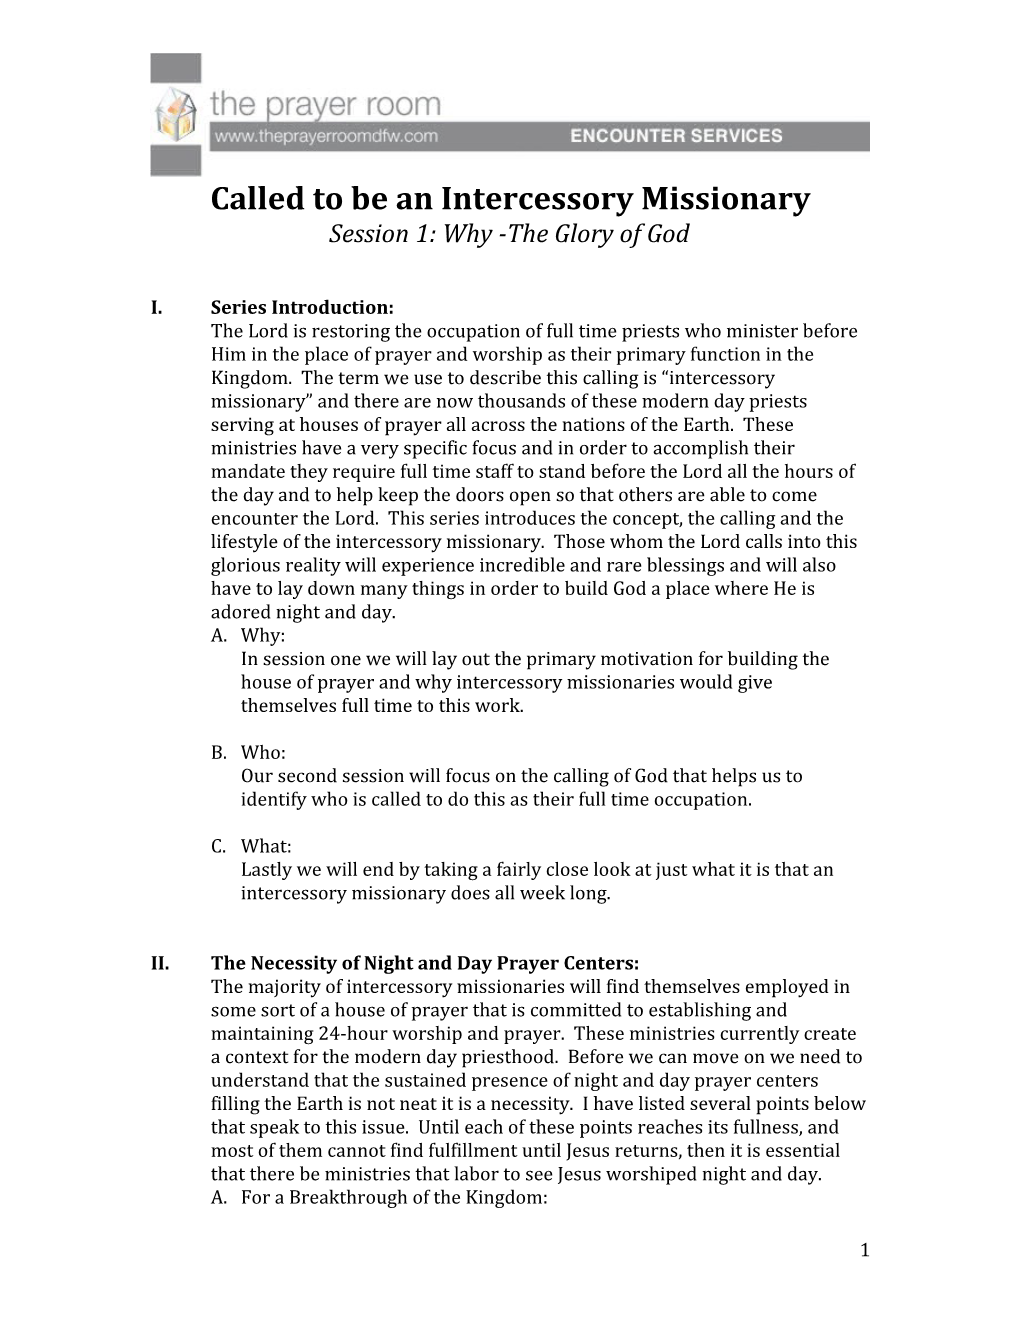 Called to Be an Intercessory Missionary